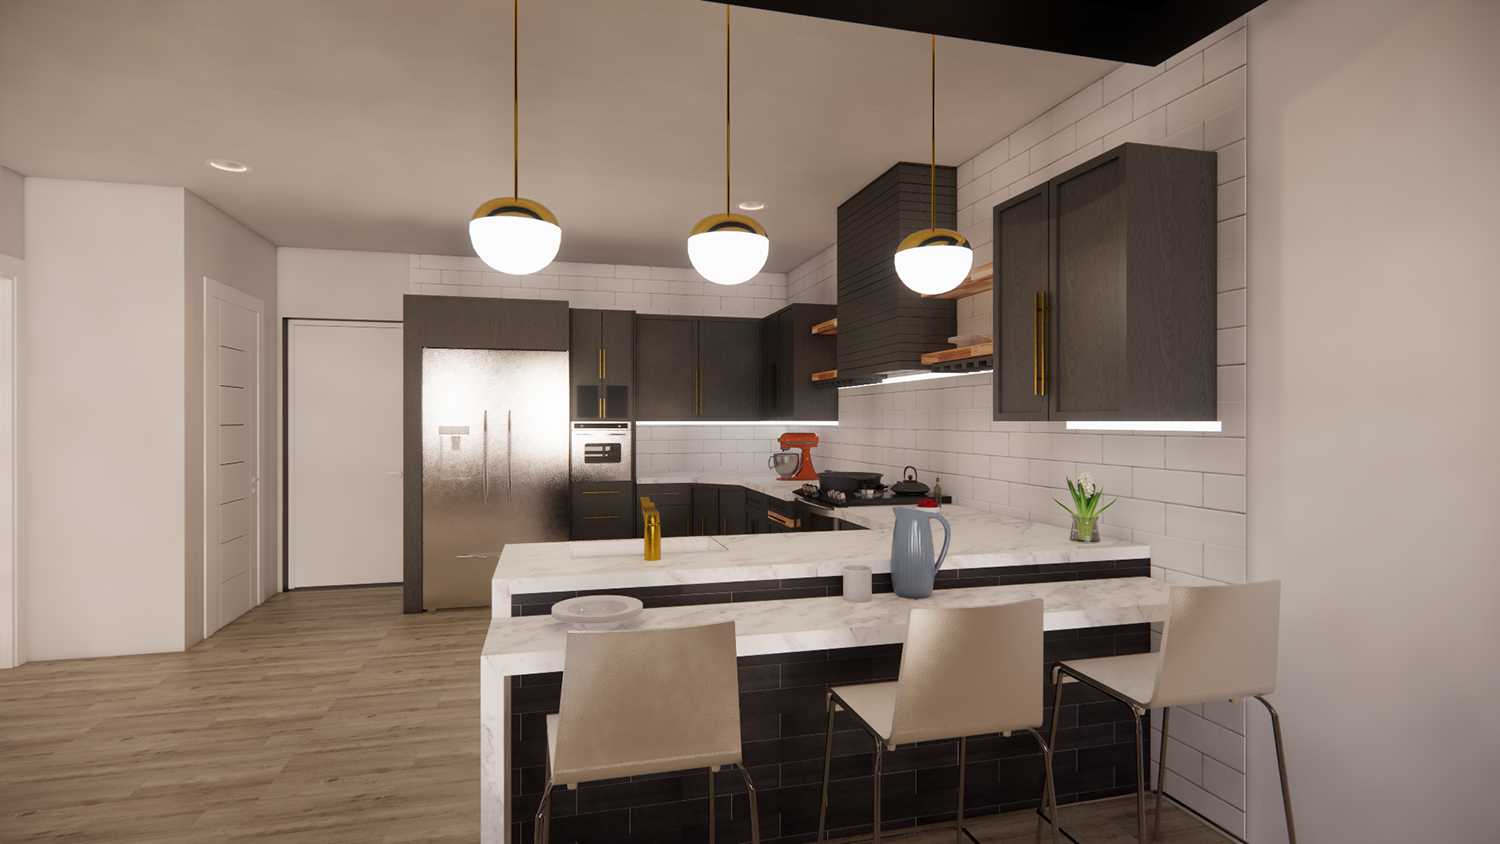 A back look at an open-concept kitchen design.